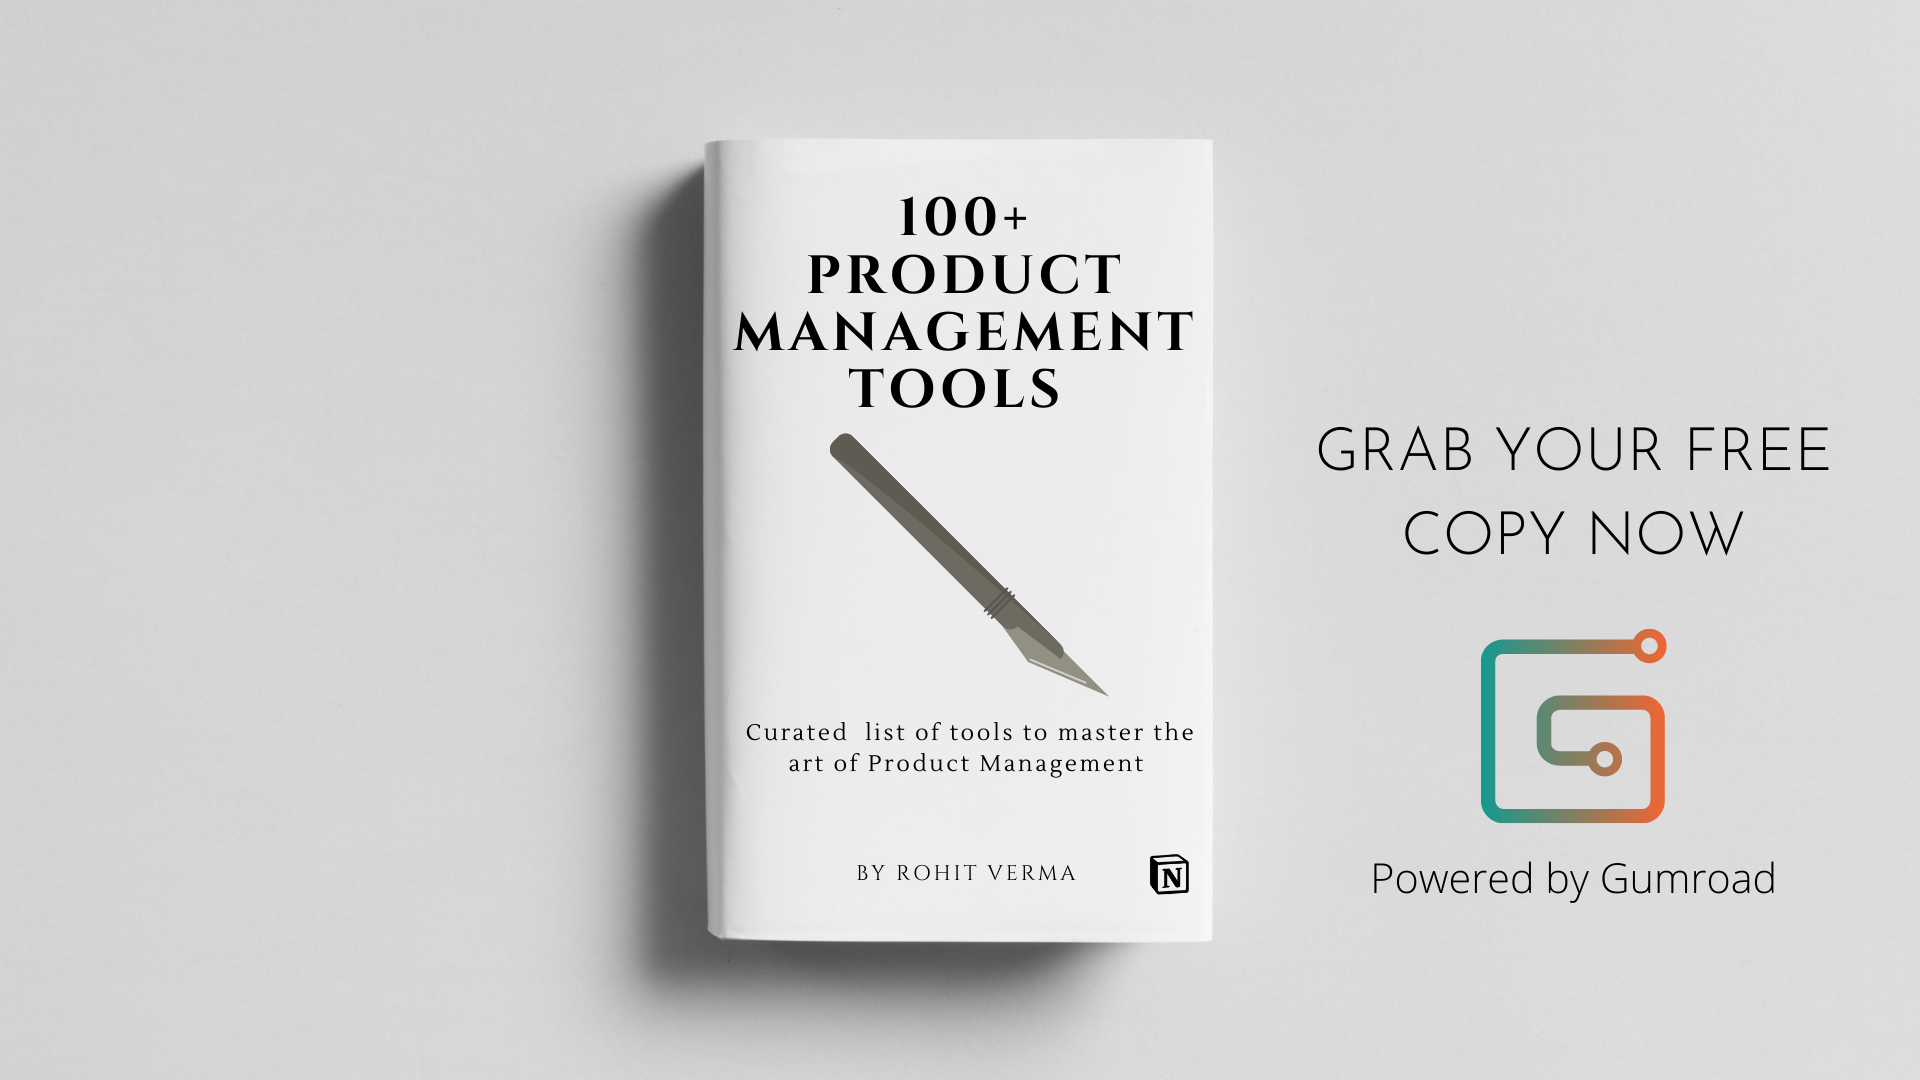 Ultimate list of 100+ Product Management tools 🛠 | by Rohit Verma | Medium